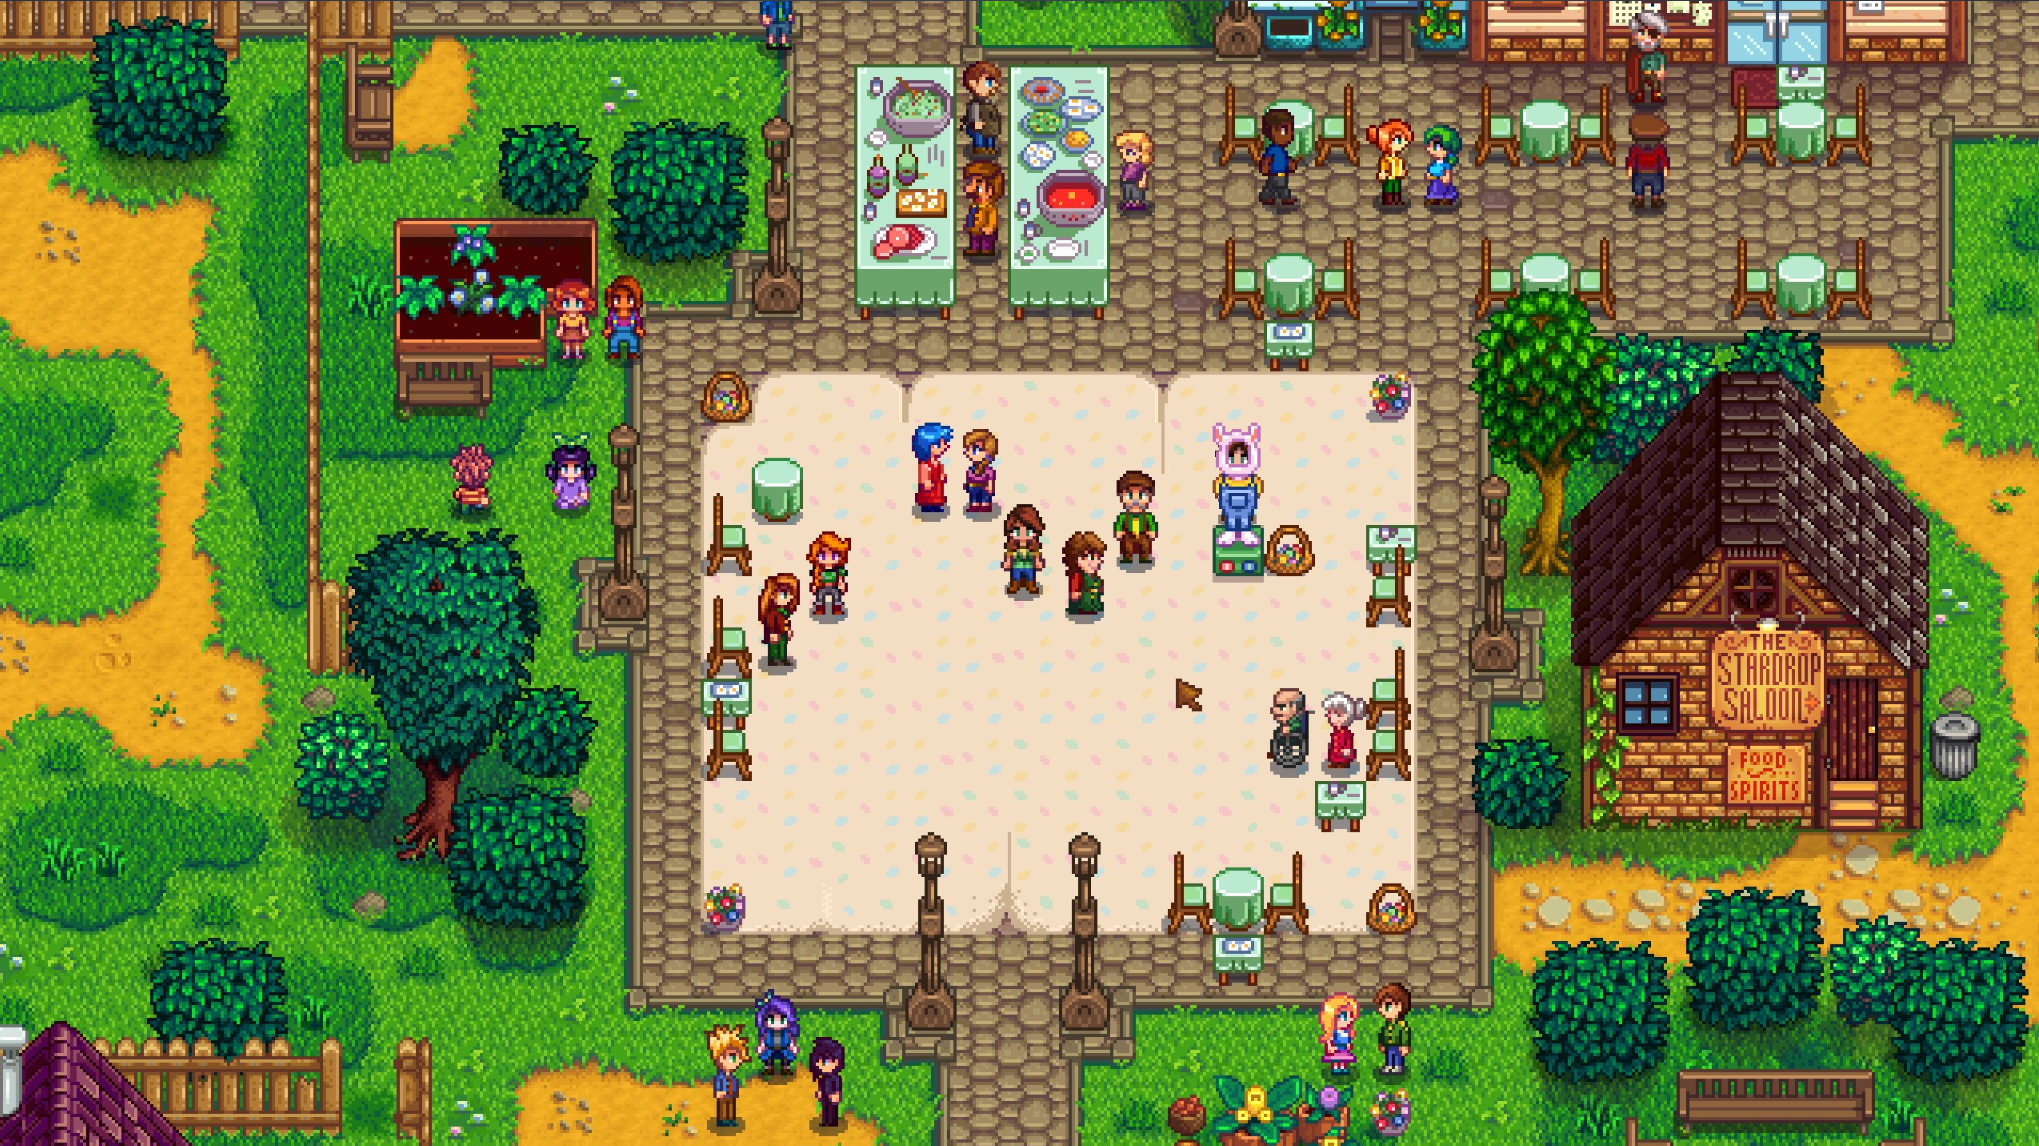 My quest to find one of Stardew Valley's rarest items left me as a social outcast, but that won't stop my early-morning rummages